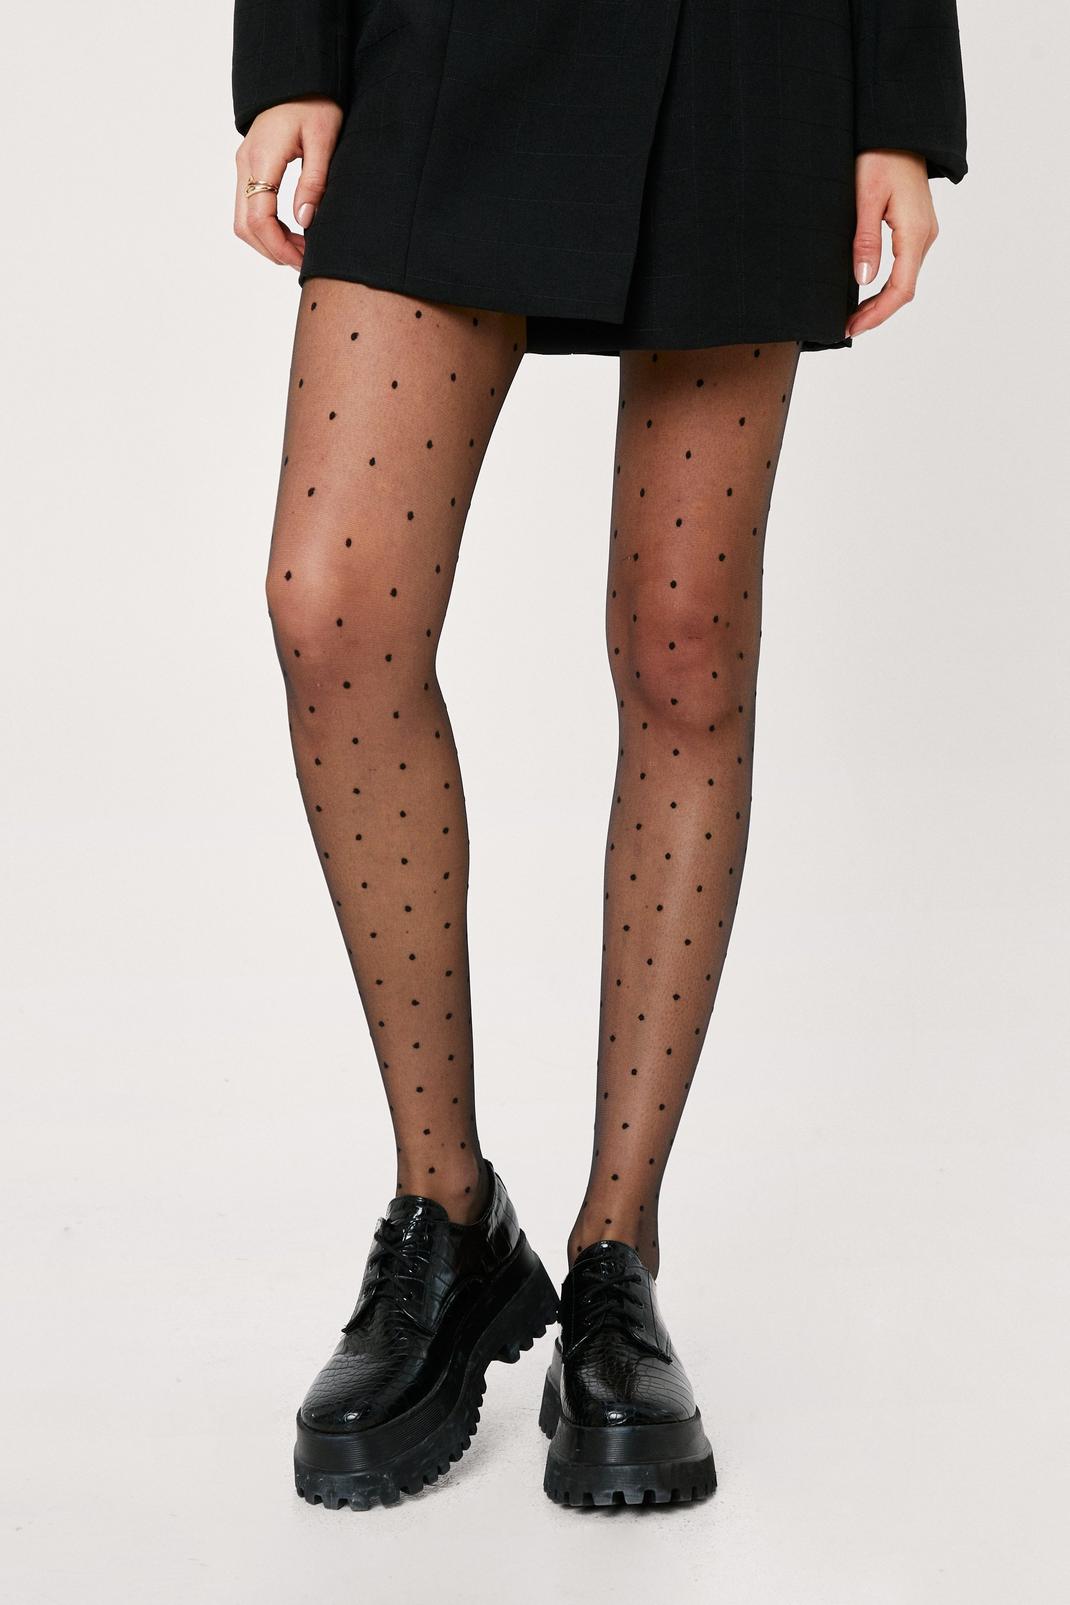 PLT Initial Patterned Tights